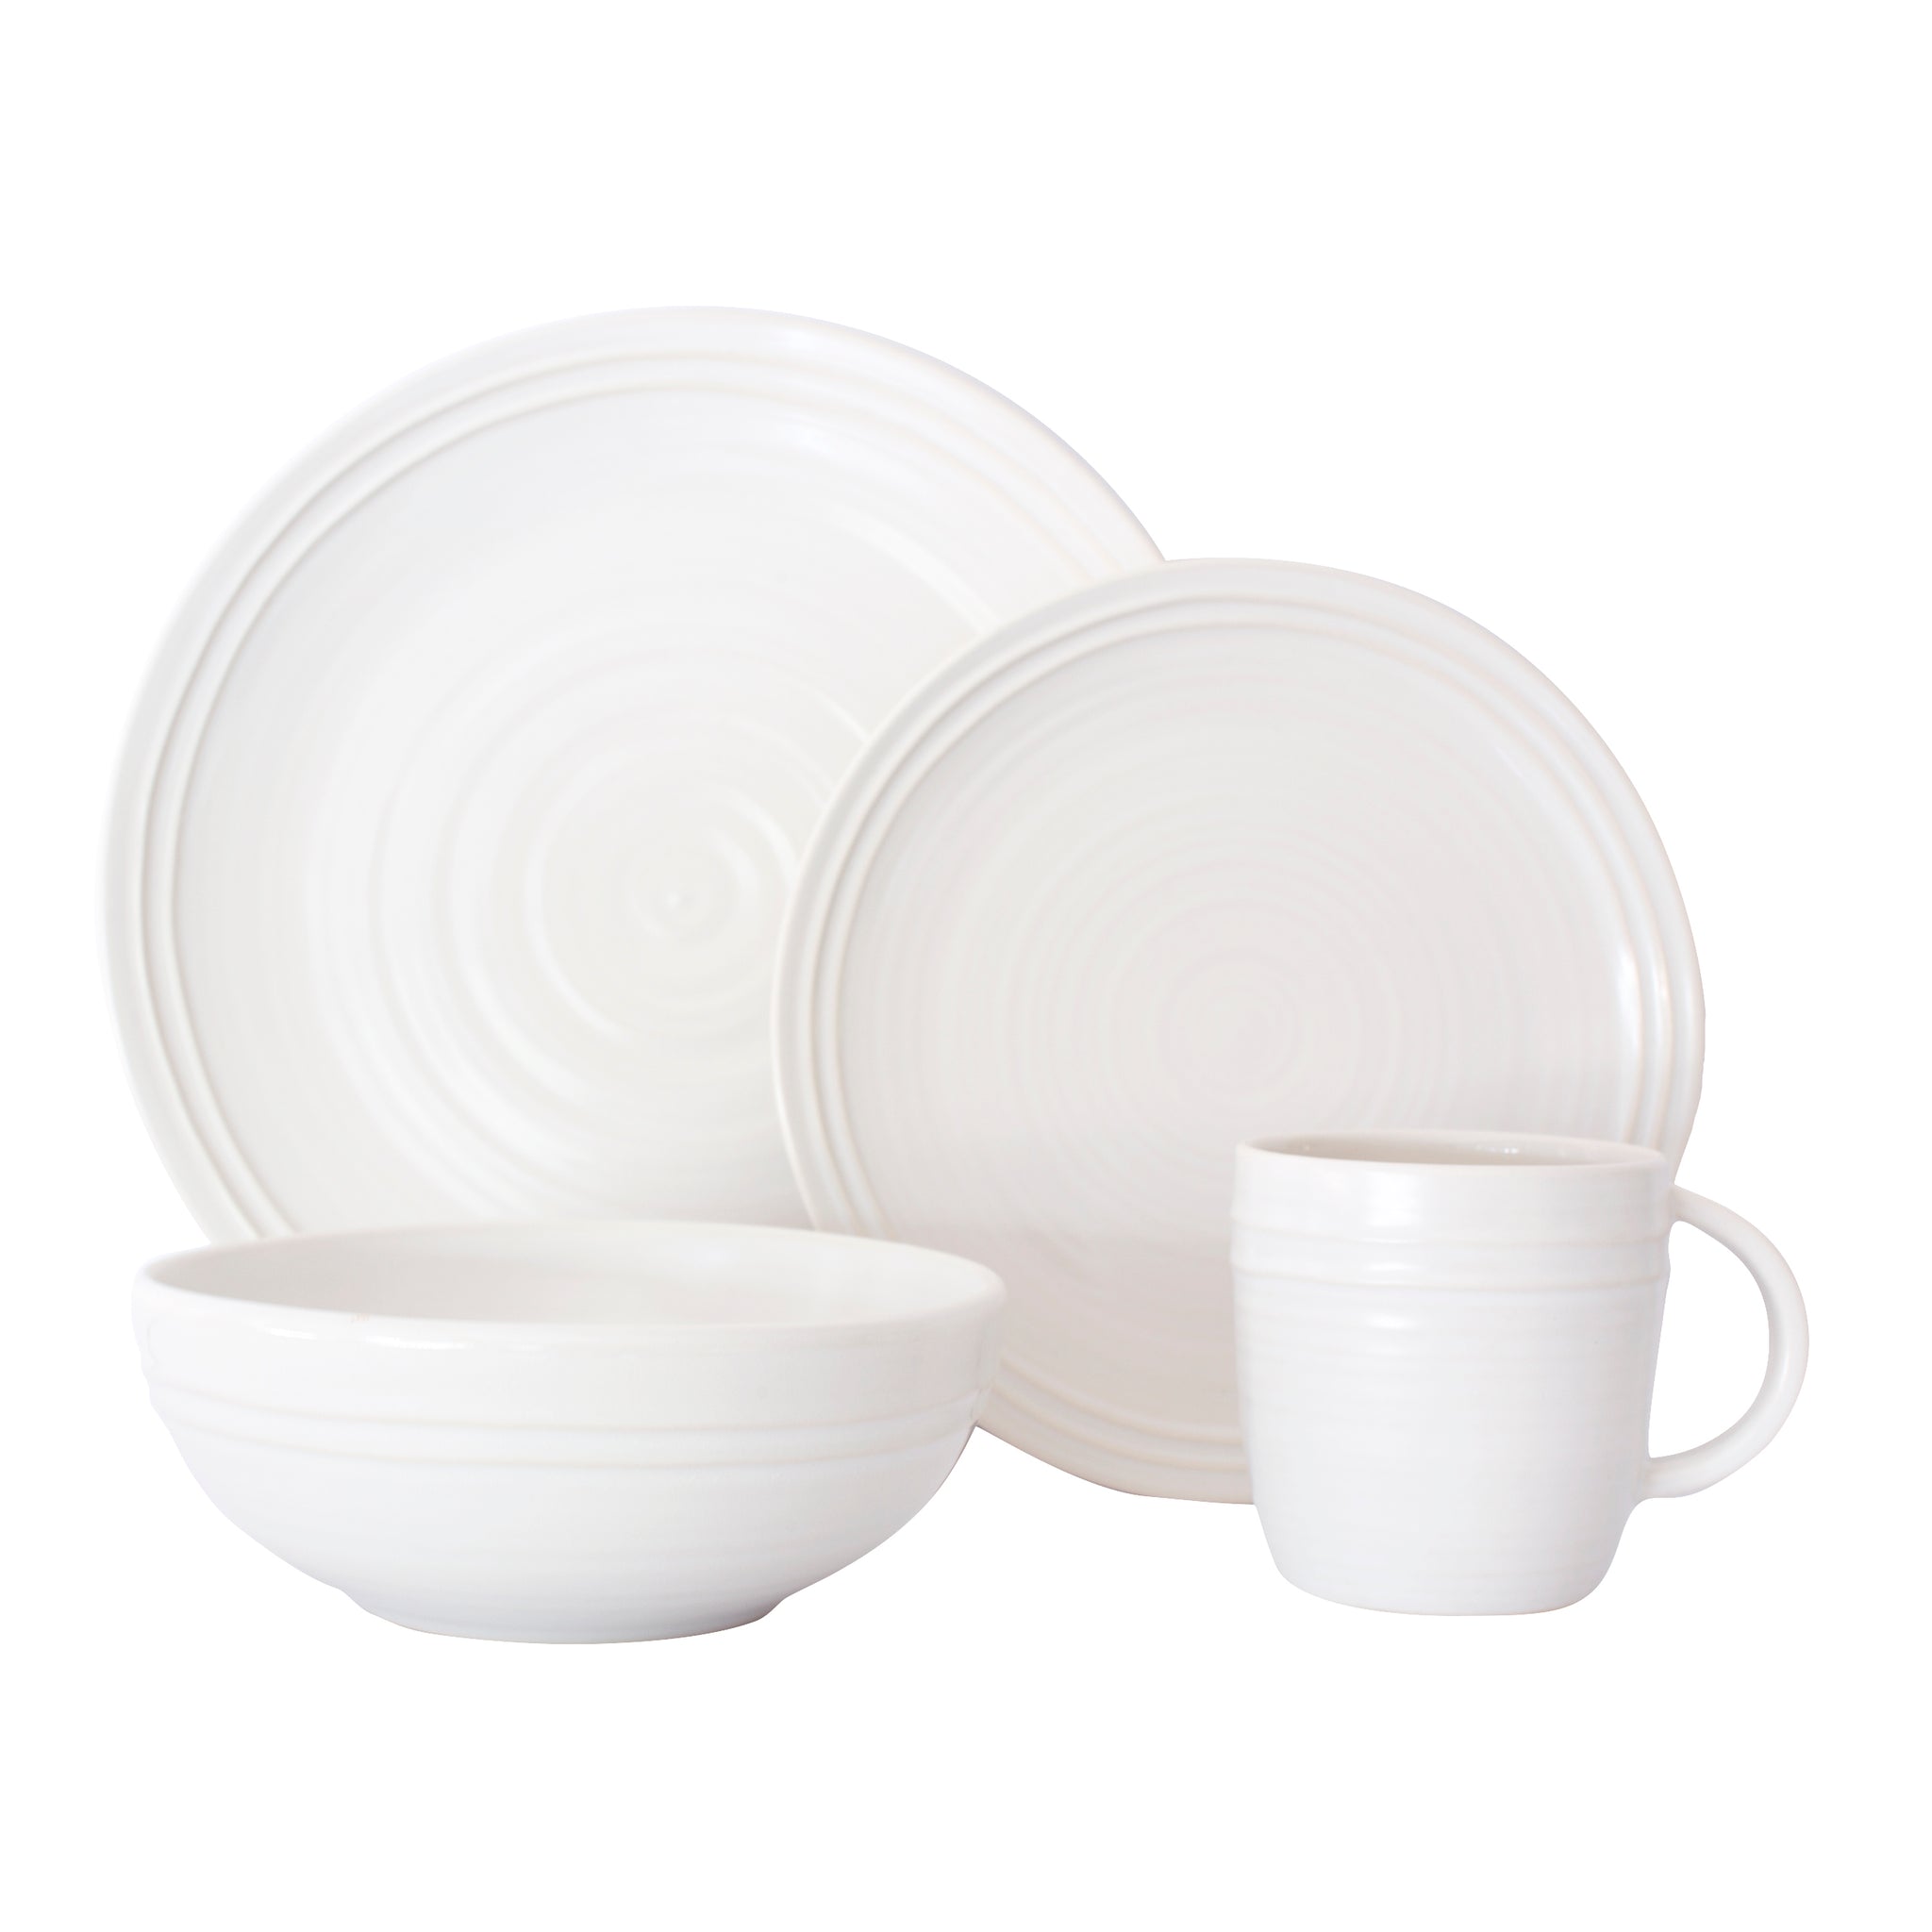 Lines 4-piece place setting - White/White